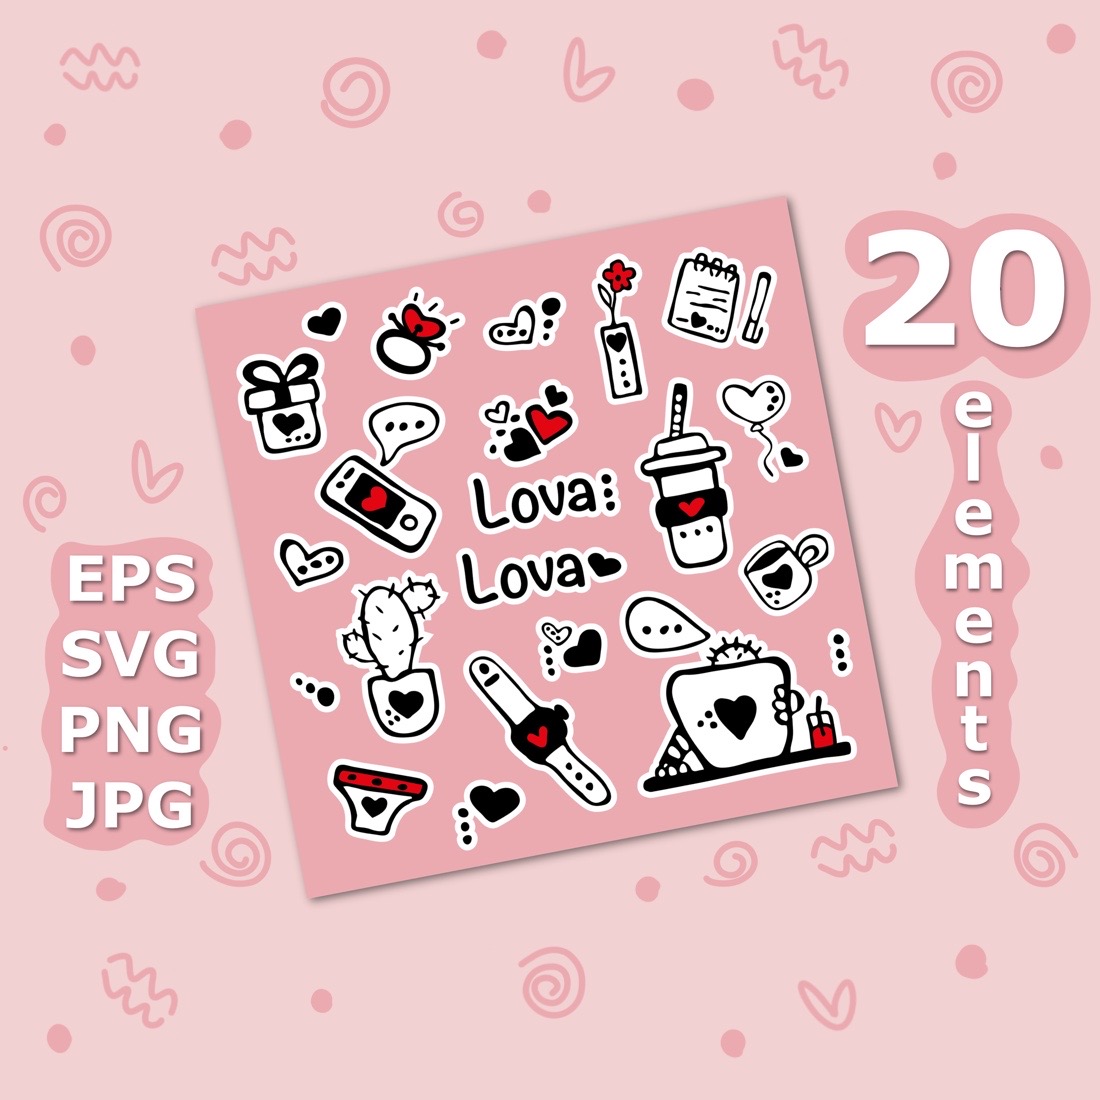 Love in Everyday Life Stickers Clipart cover image.